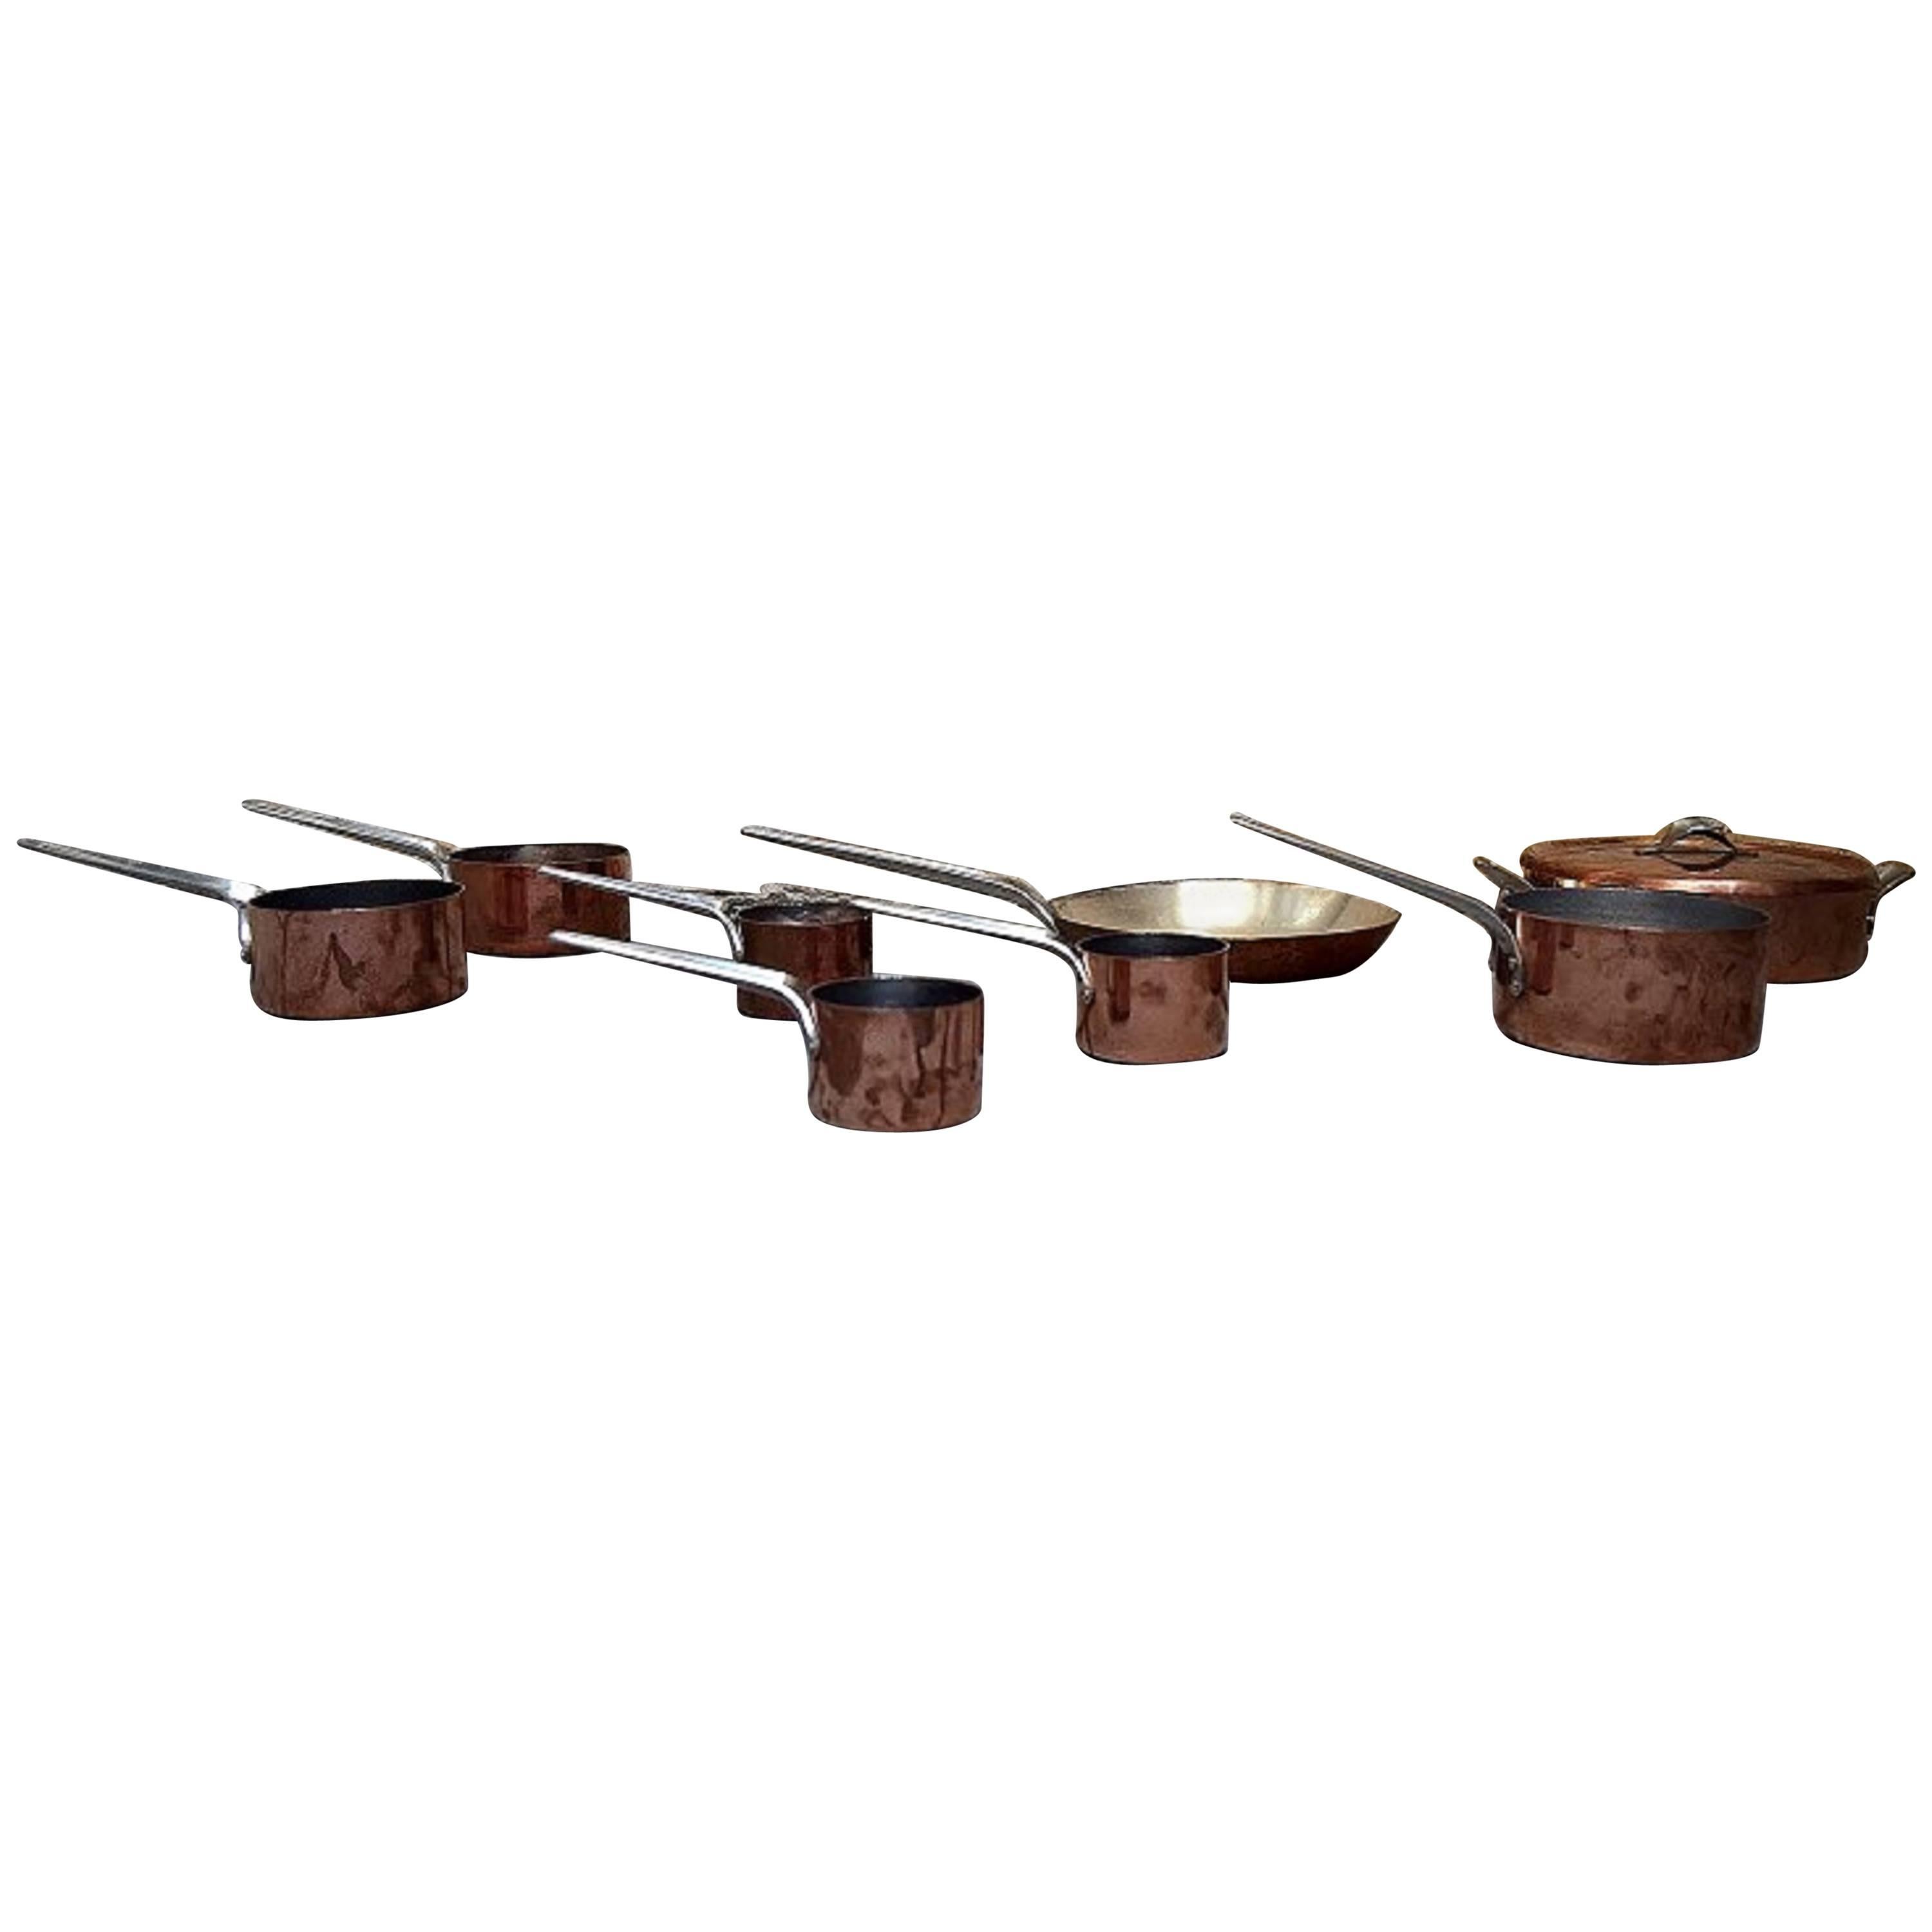 Henning Koppel for Georg Jensen "Taverna" Eight Pots and Pan in Copper